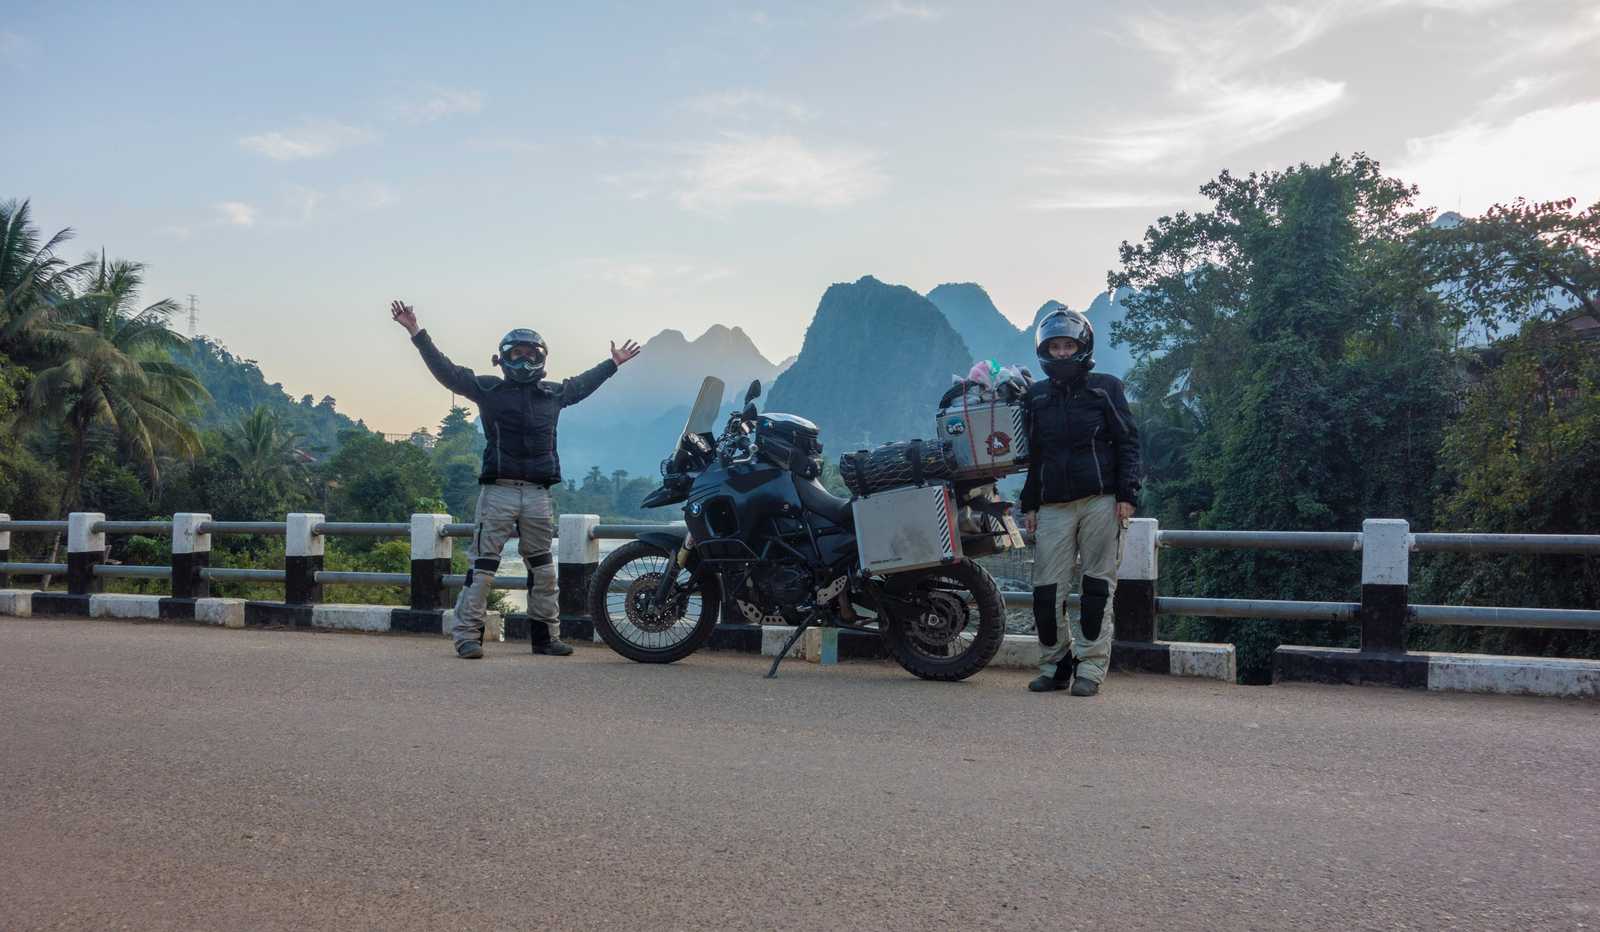 Laos, an awesome country to visit by motorcycle